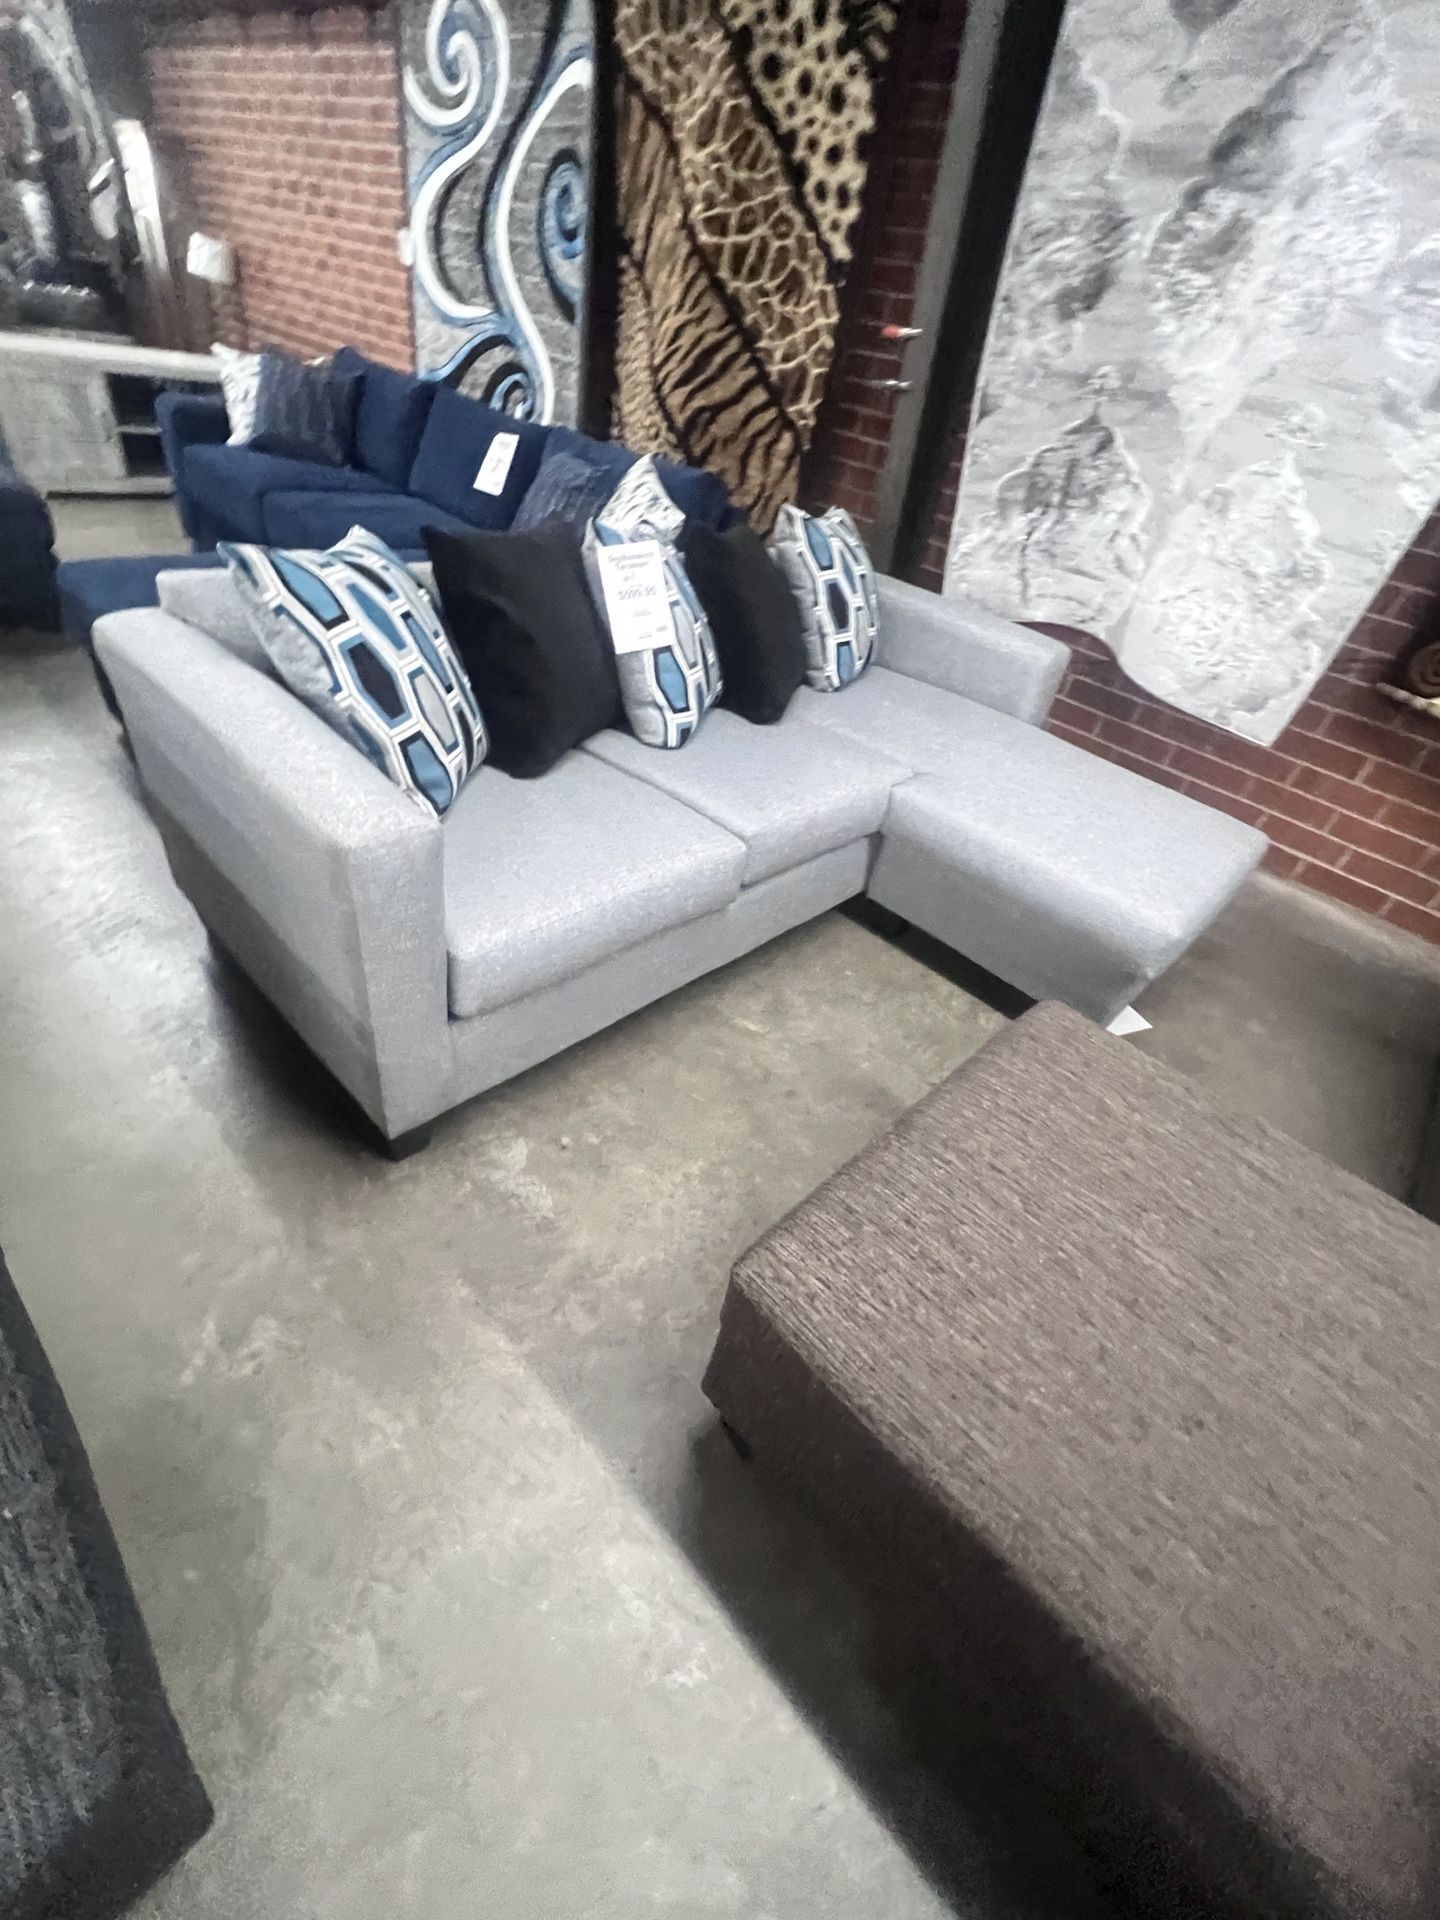 Sofa Chaise! Just Unloaded Today! Only One! 